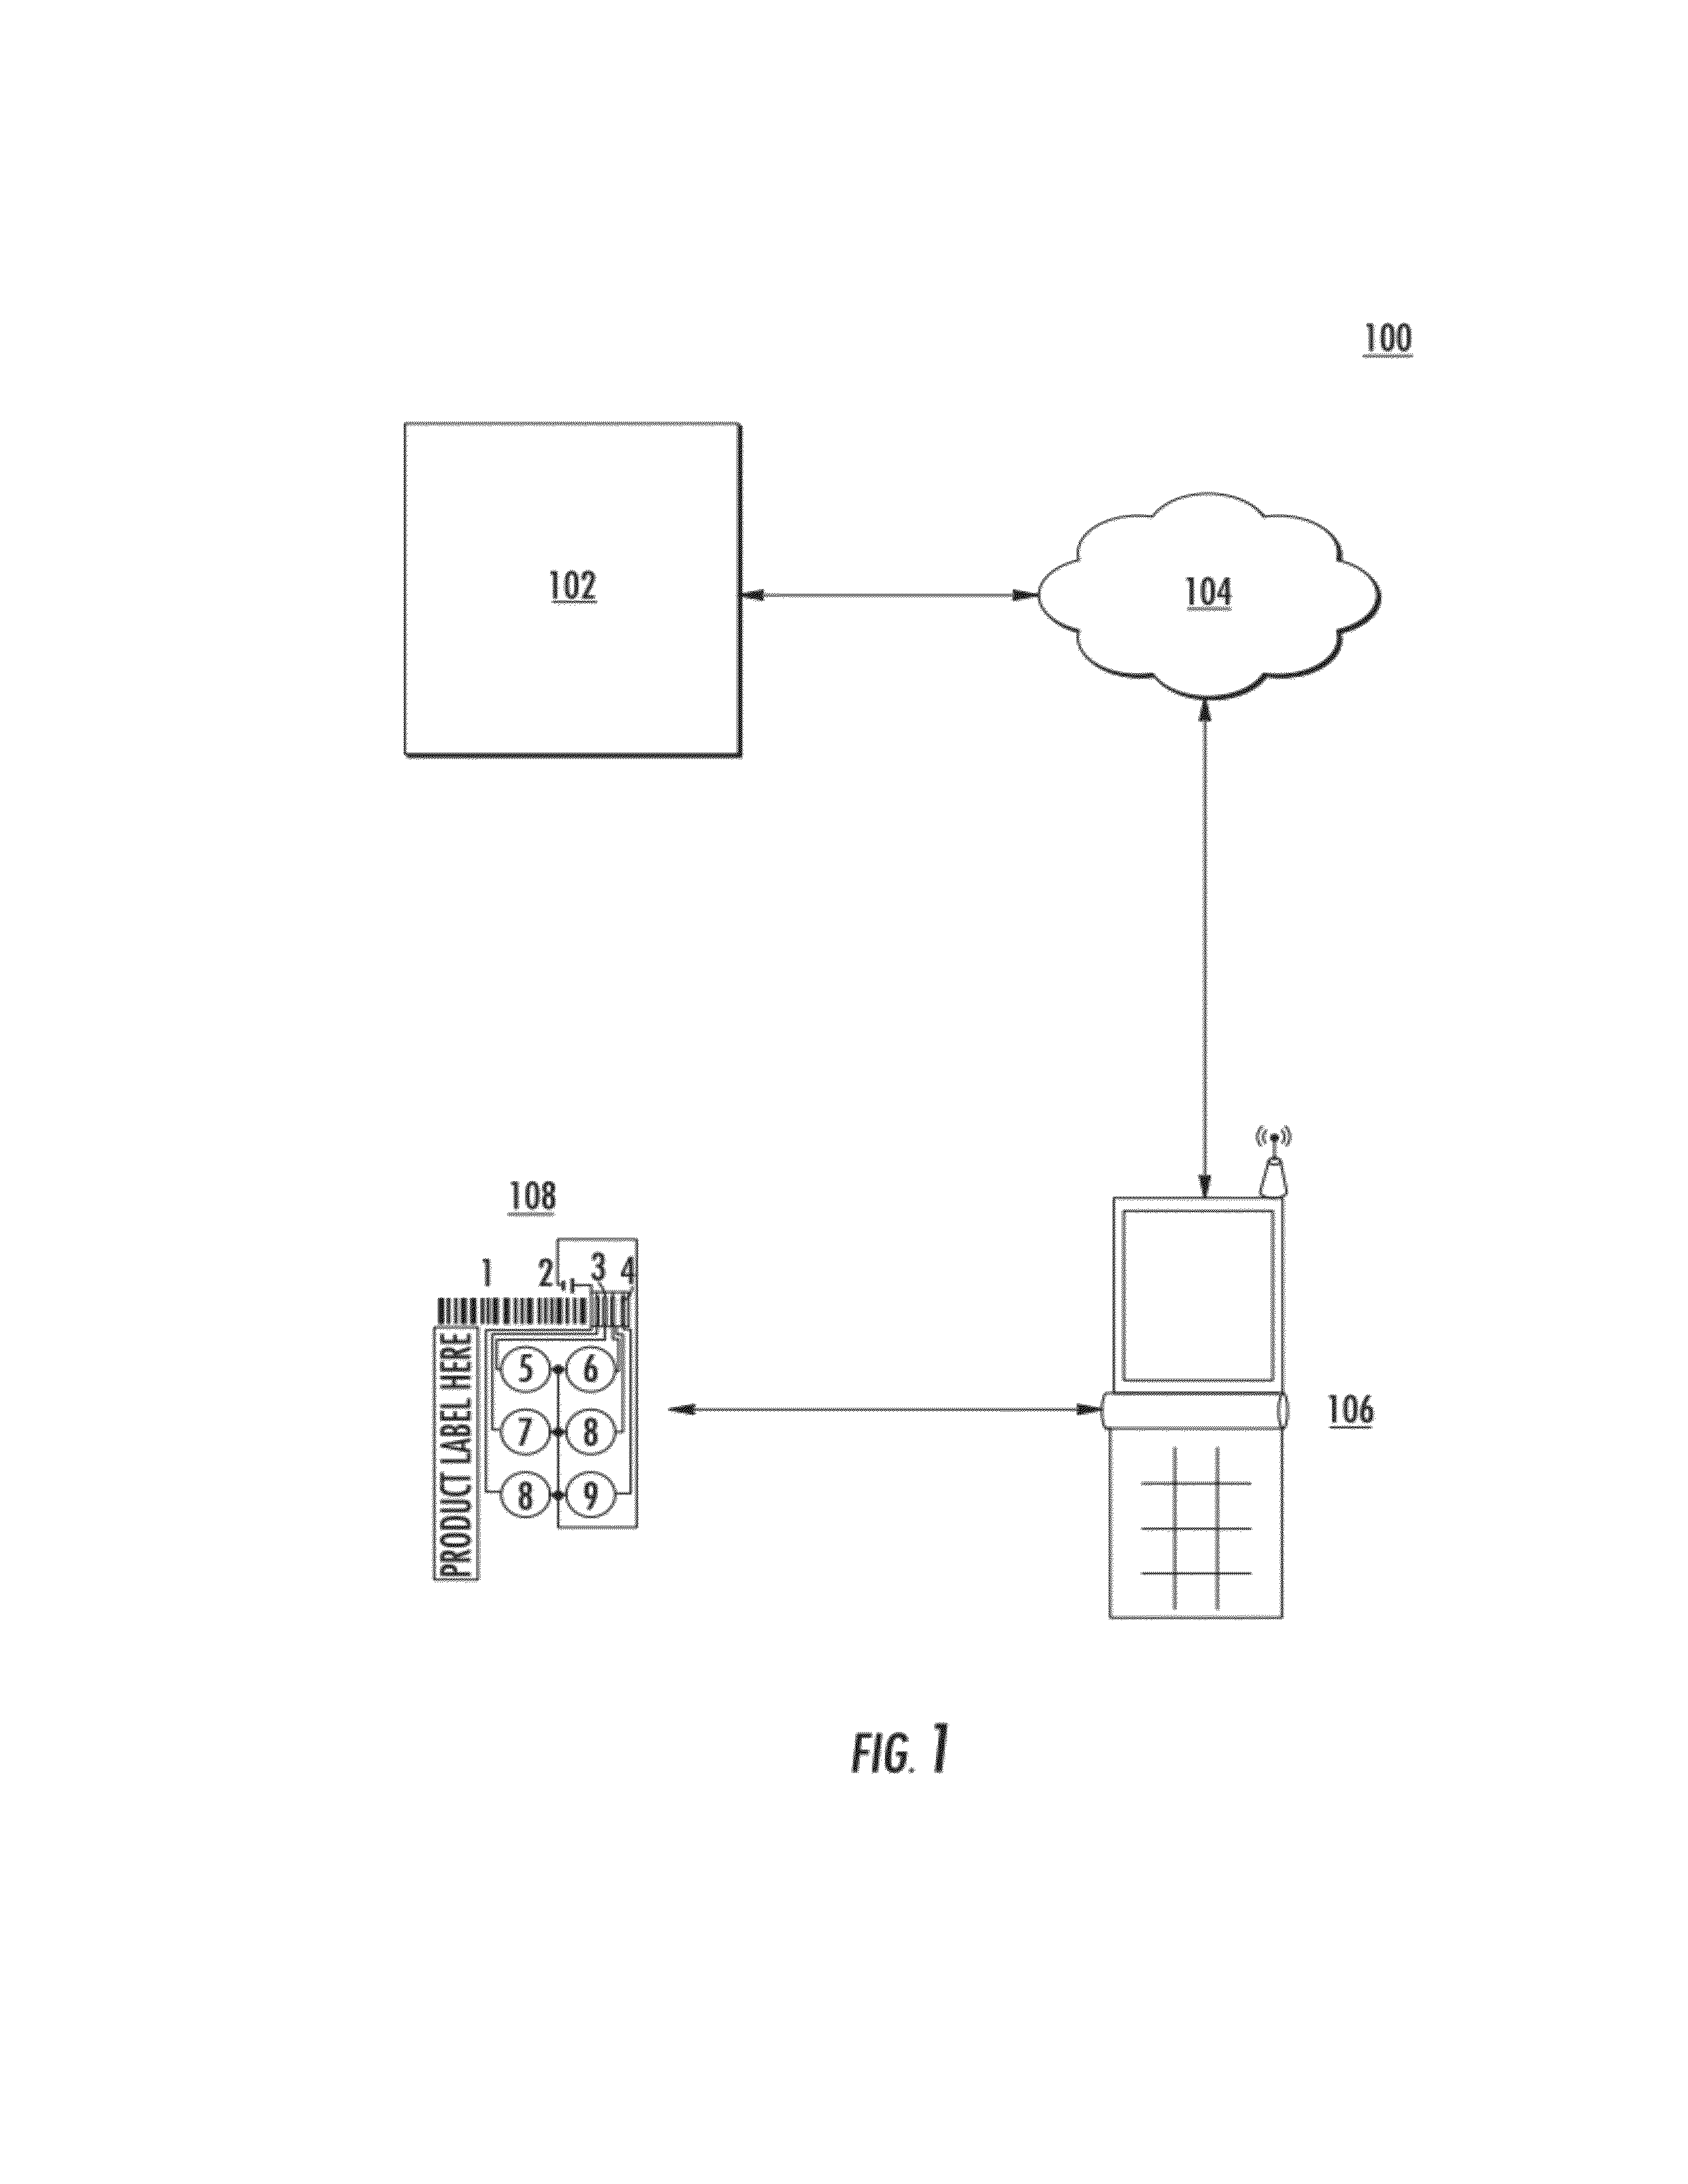 System and method for automating and verifying medication compliance